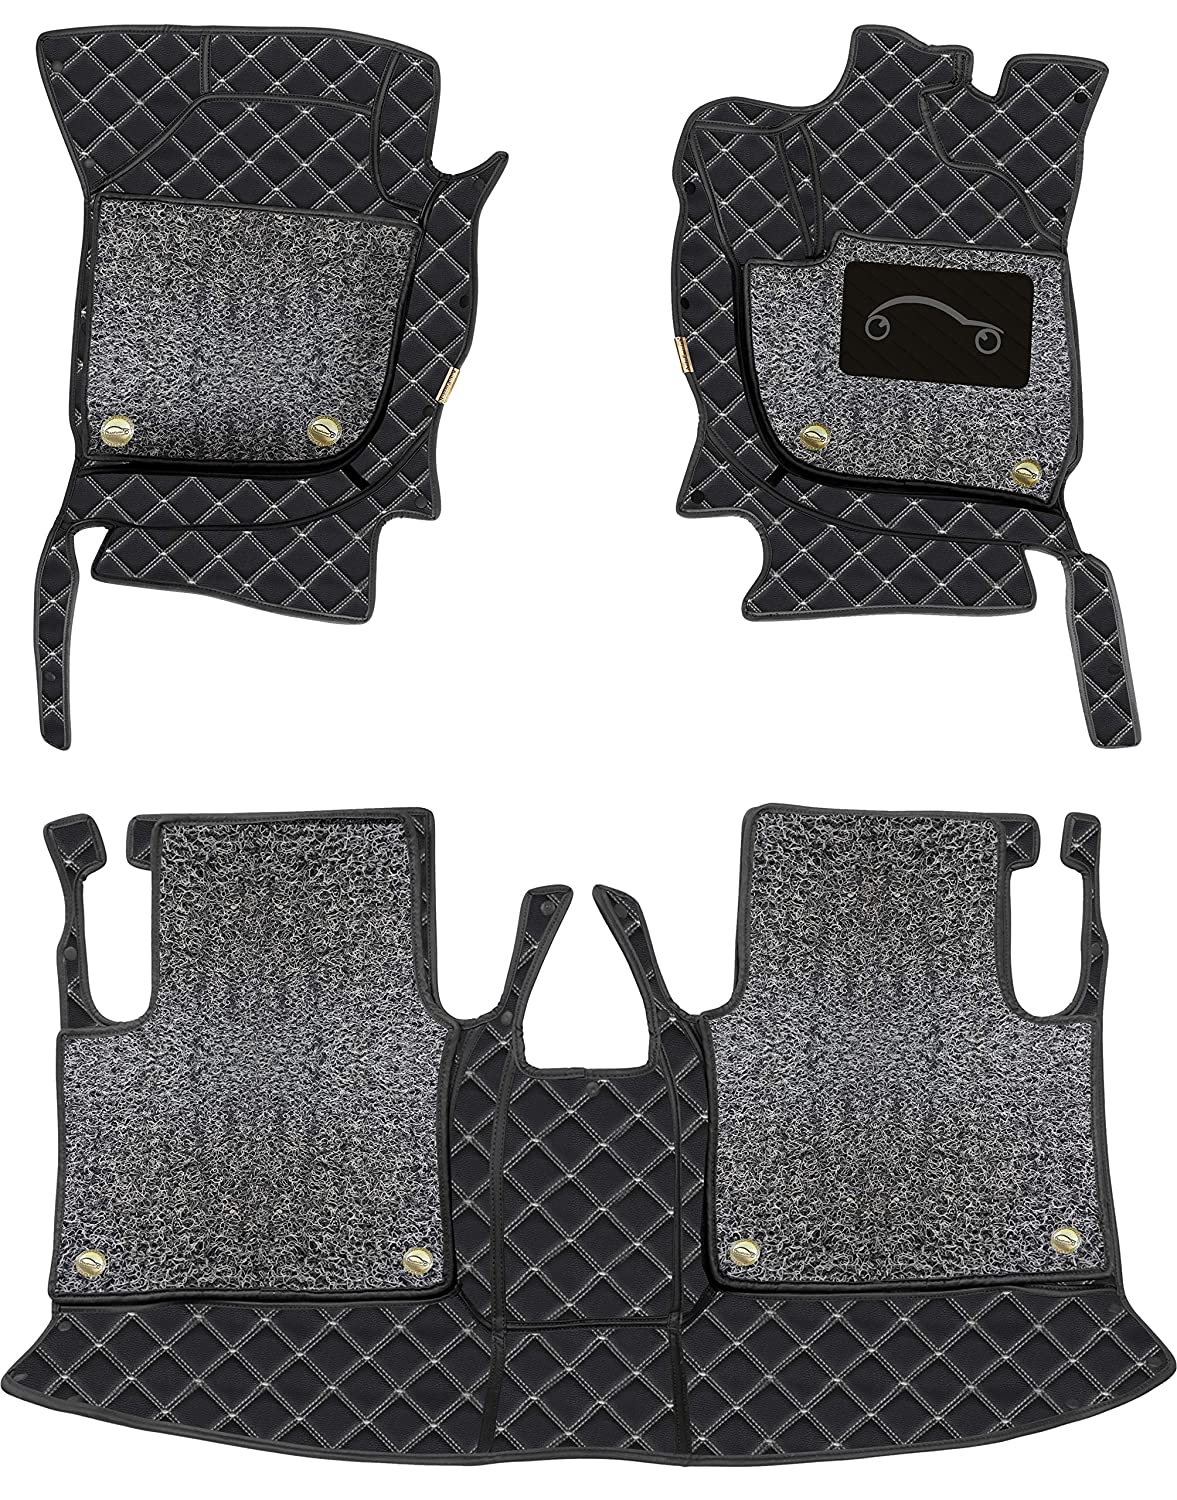 Land Rover Discovery Sport R-Dynamic (7 Seater) 2020 7D Luxury Car Mat, All Weather Proof, Anti-Skid, 100% Waterproof & Odorless with Unique Diamond Fish Design (24mm Luxury PU Leather, 2 Rows)